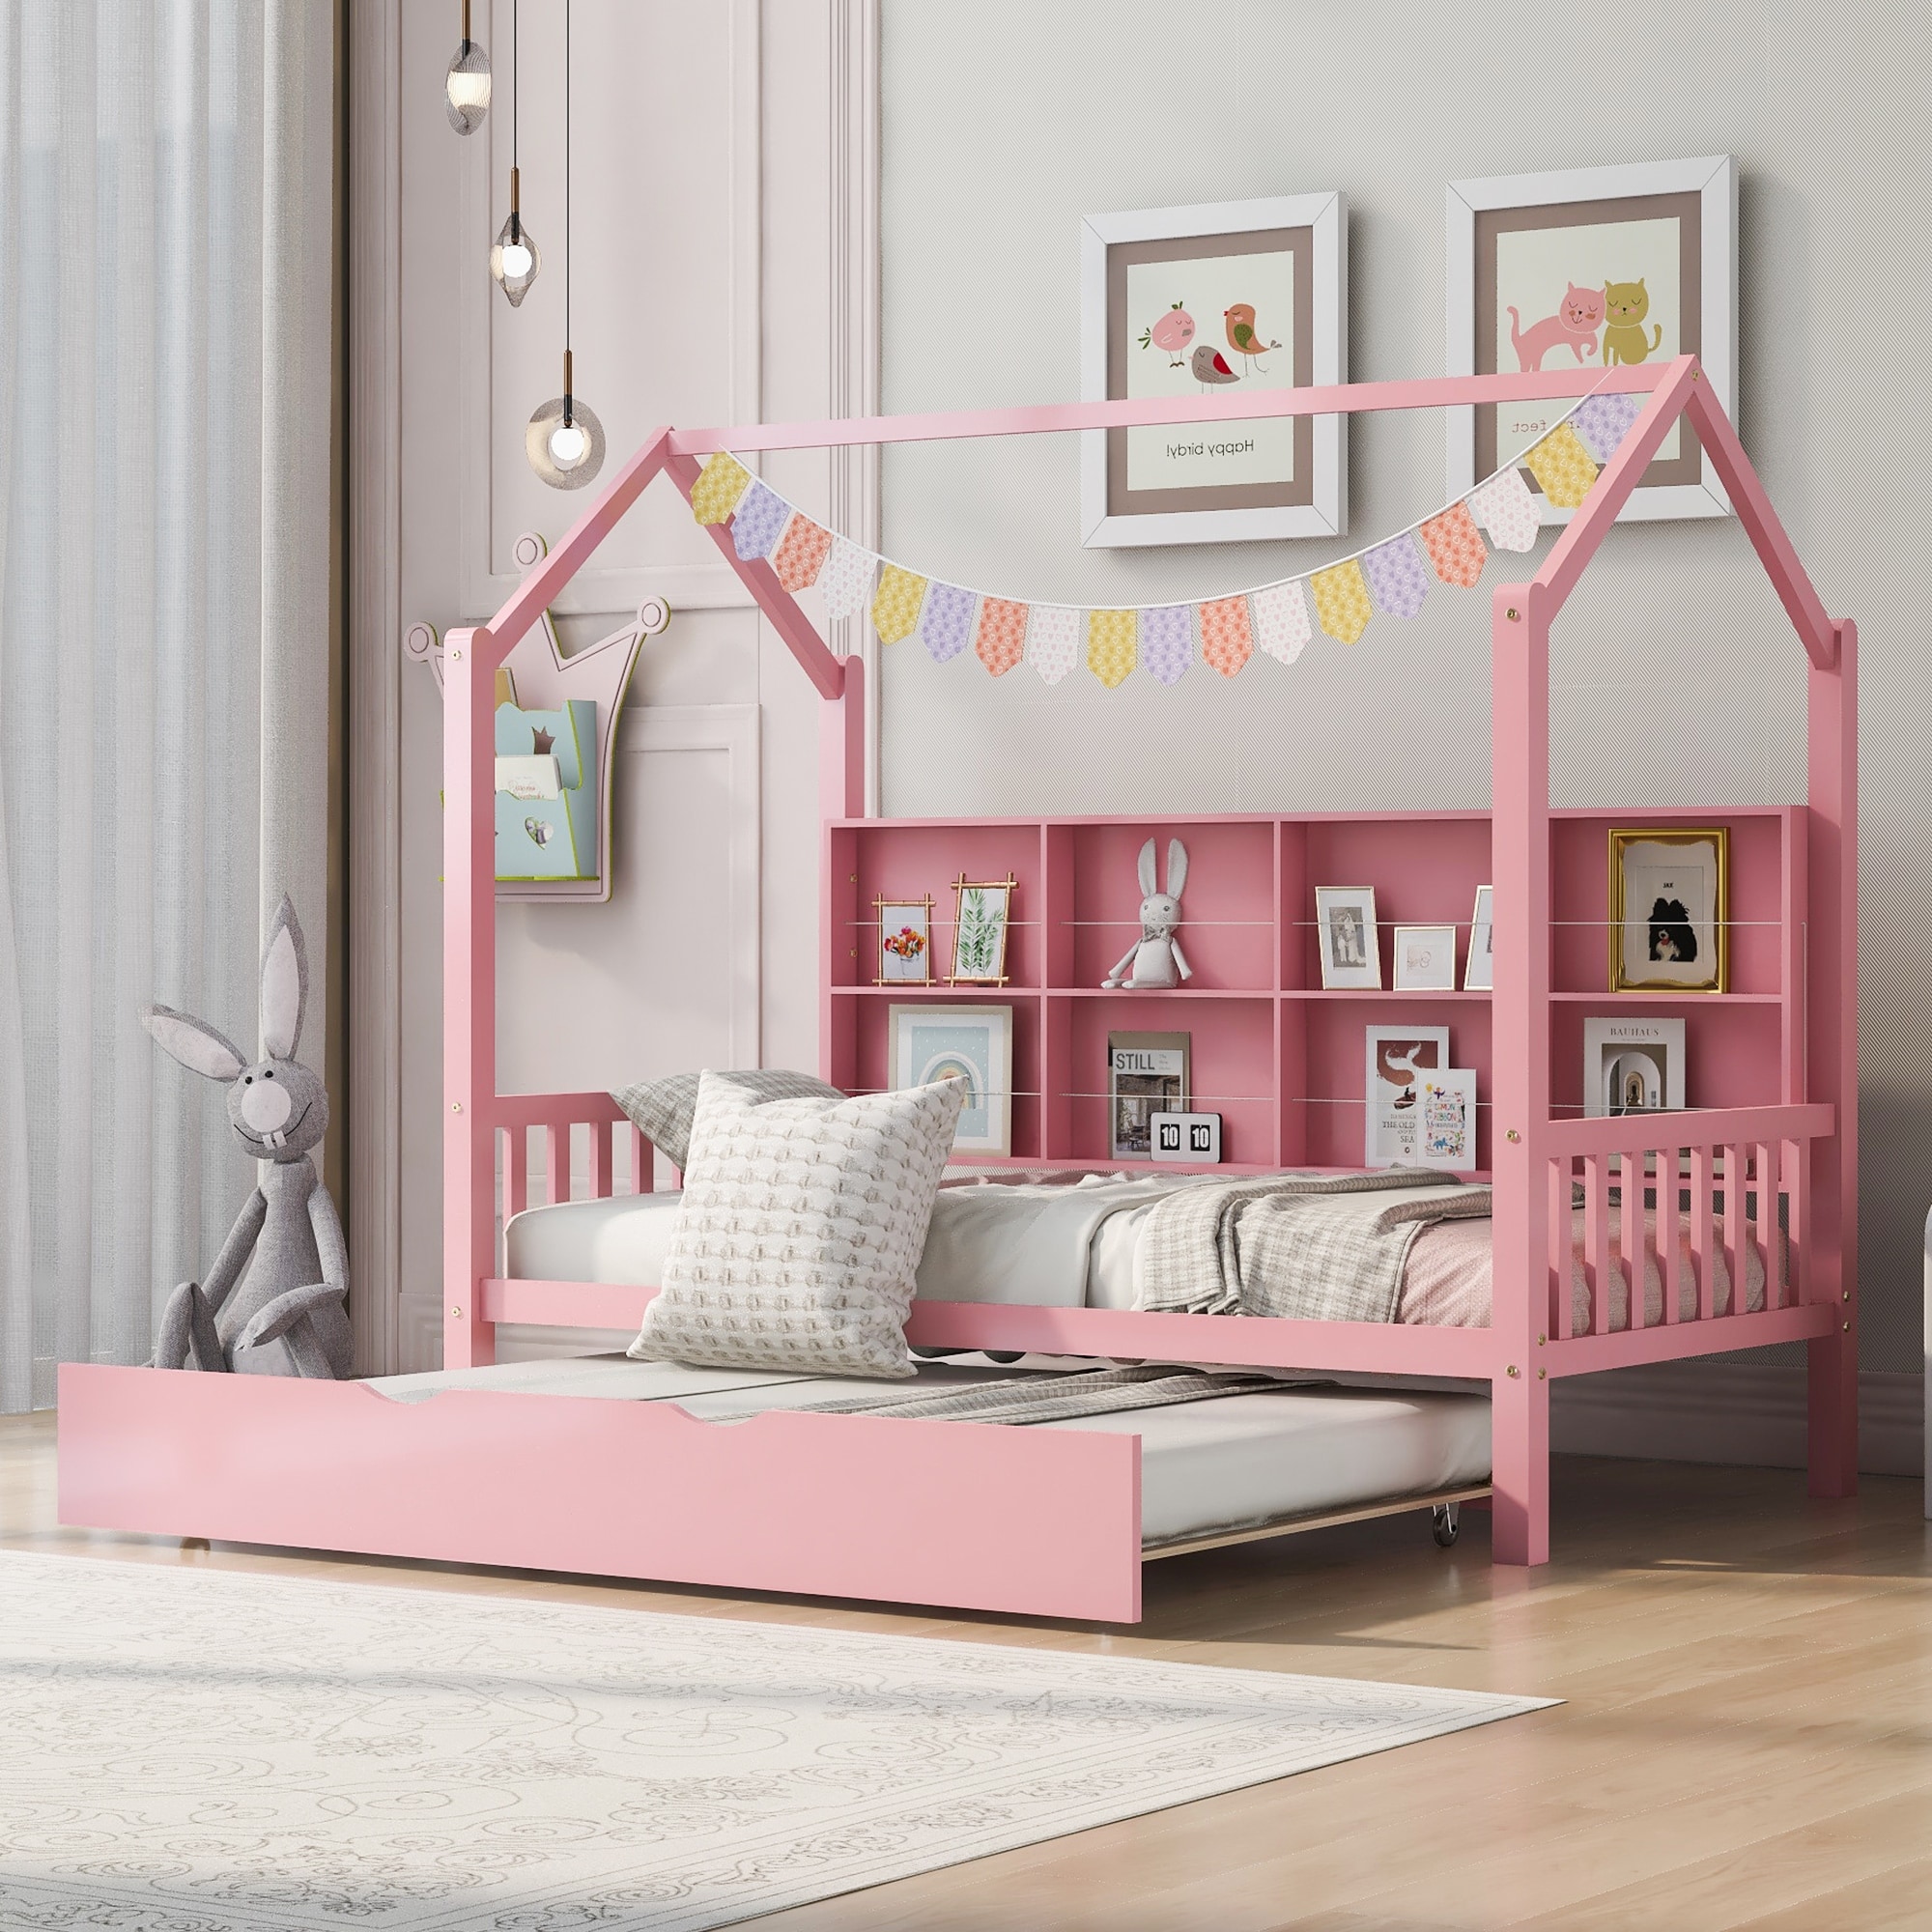 https://ak1.ostkcdn.com/images/products/is/images/direct/beb9ec1deeb55514cd56678d41e9cf39d84859e6/Wooden-Twin-Size-House-Bed-with-Trundle%2CKids-Bed-with-Shelf%2CPink.jpg